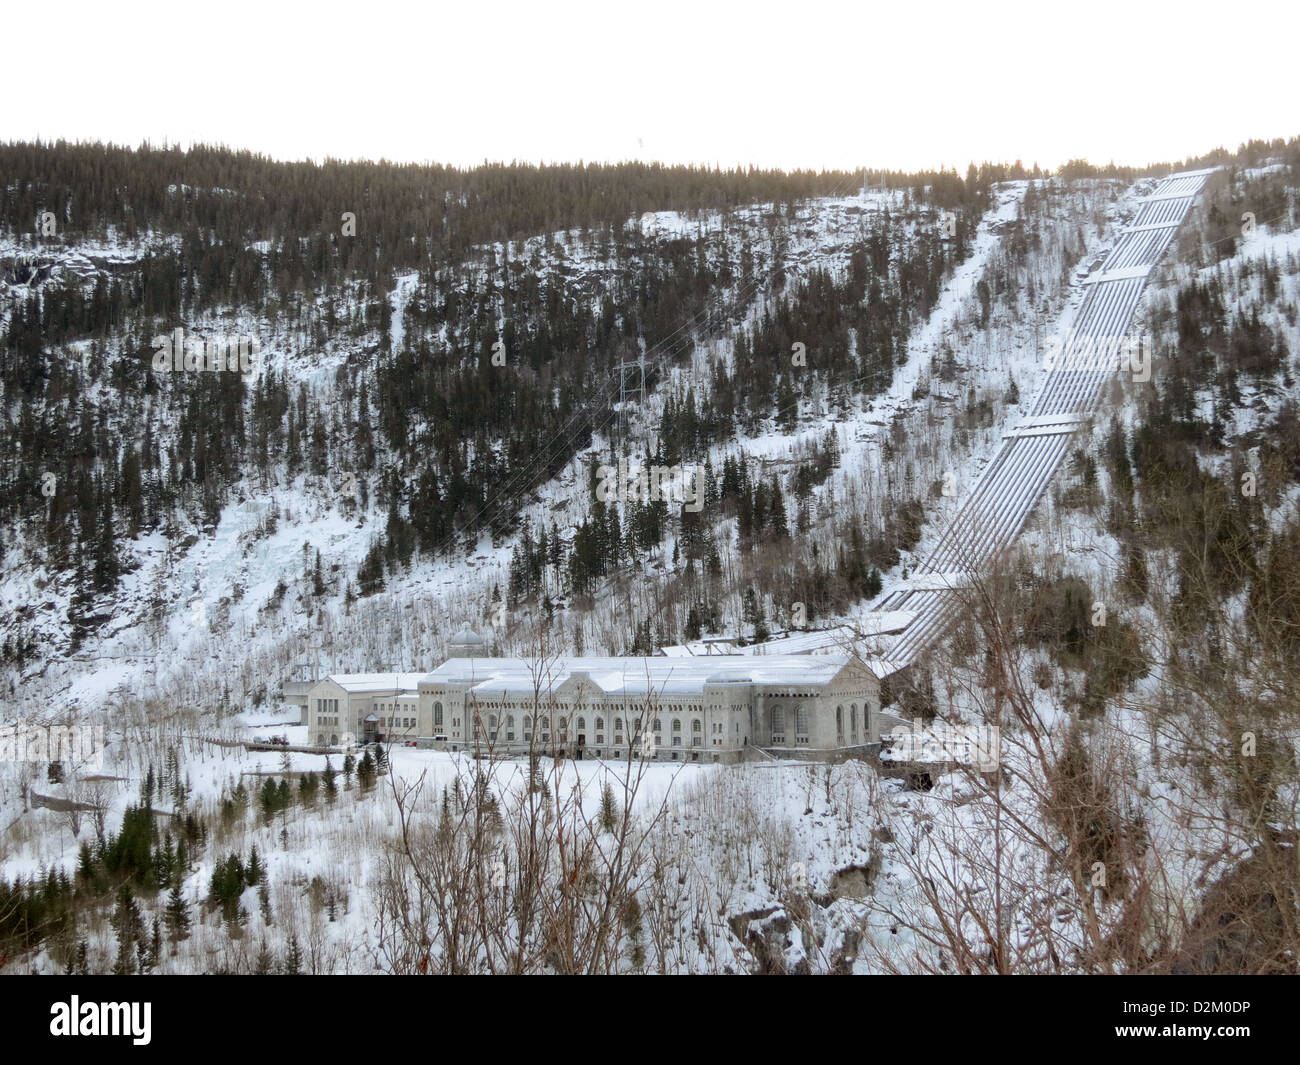 VEMORK HYDROELECTRIC PLANT, outside Rjukan, Norway. Now the Norwegian Industrial Workers Museum. See below. Photo David Gale Stock Photo